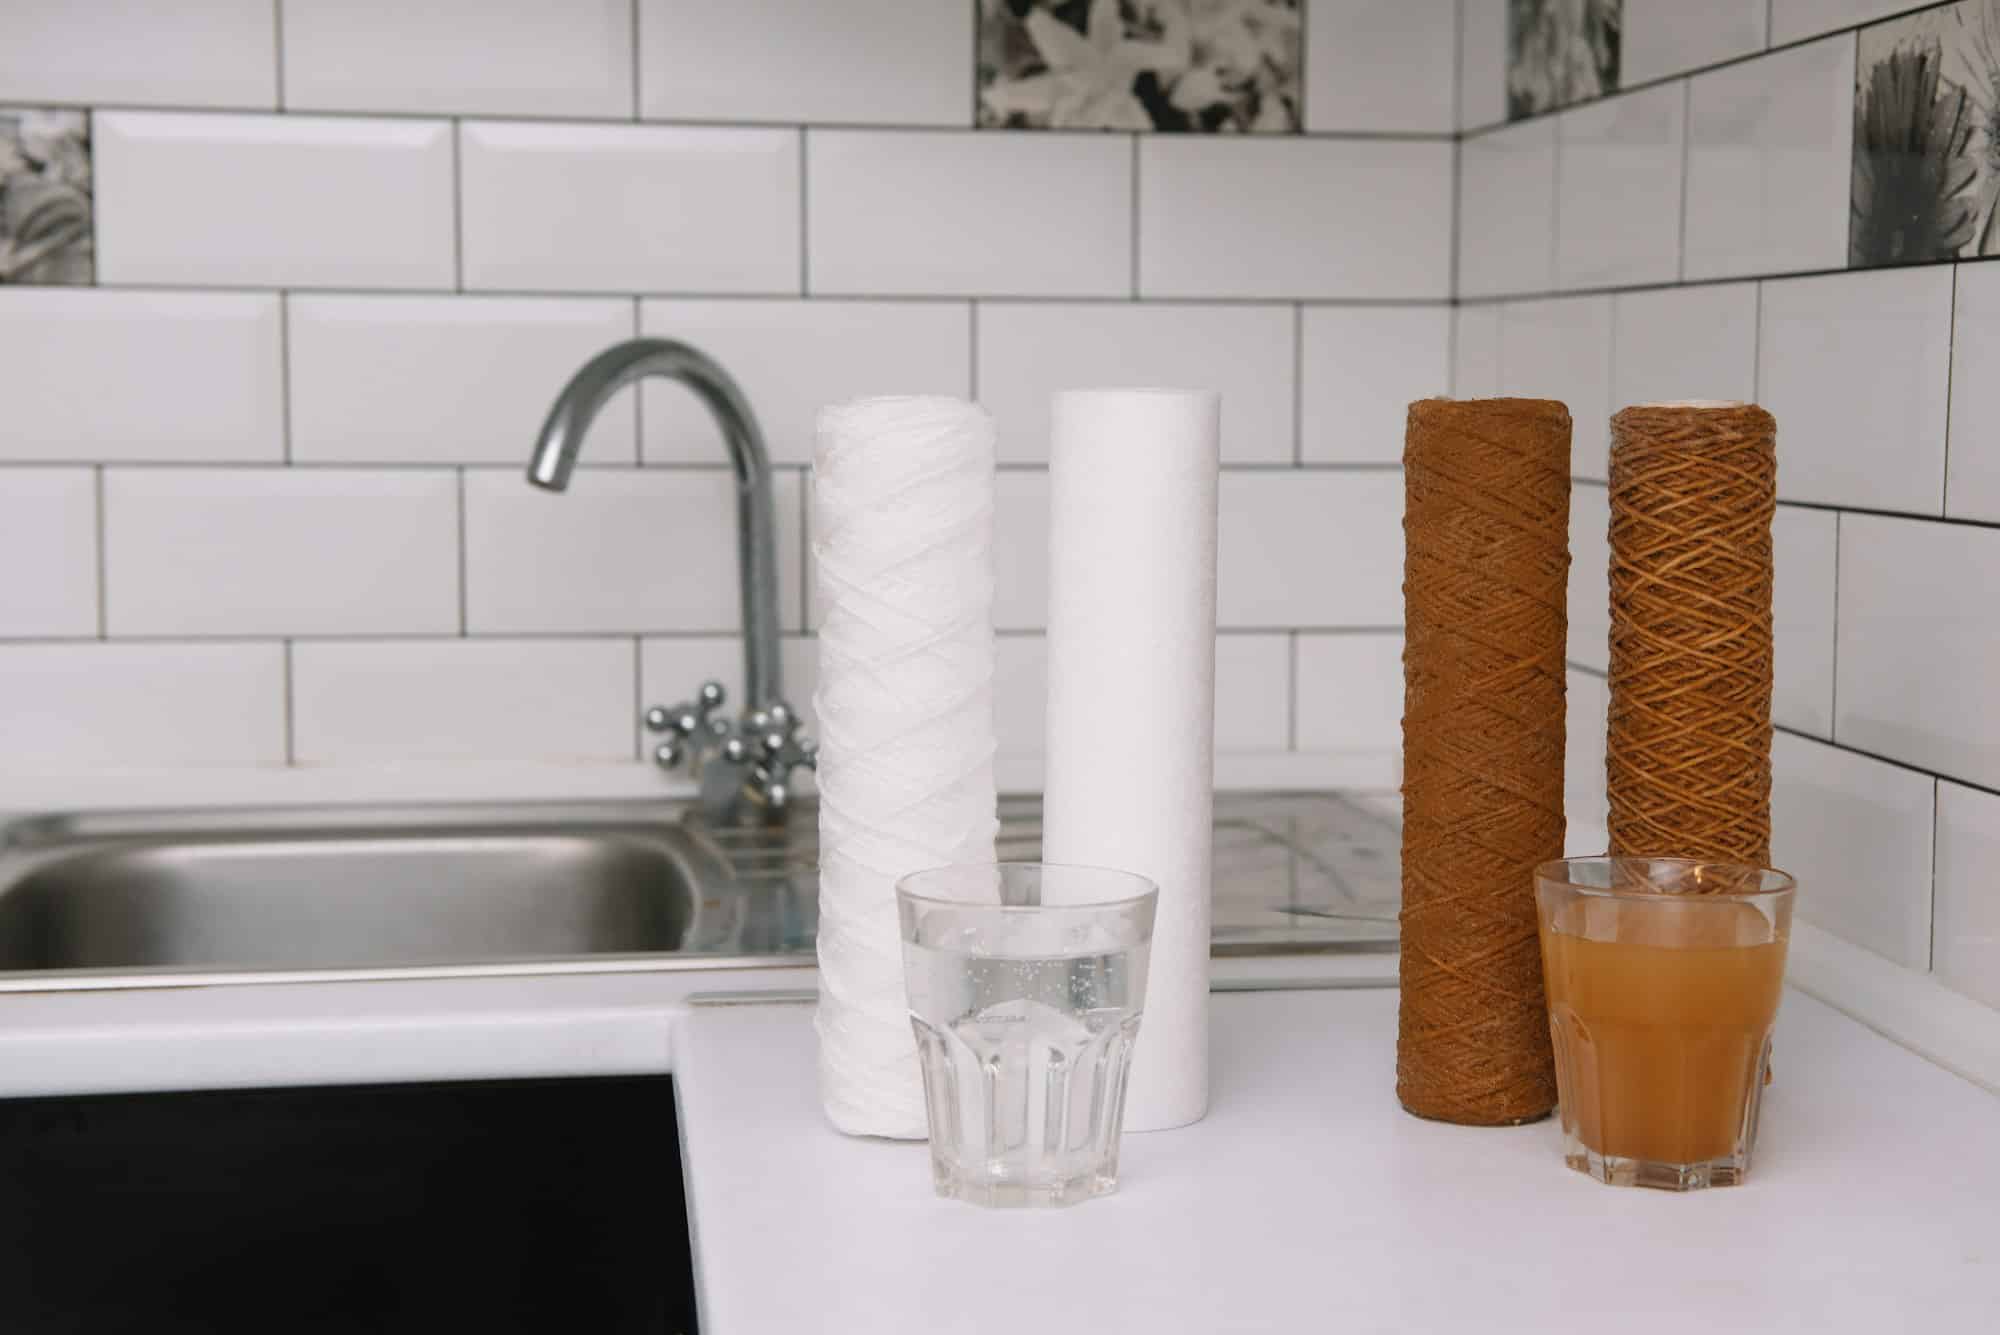 Two glasses of liquid are on a kitchen counter, one clear and one brown. Behind them are two white cylindrical objects and two brown cylindrical objects, likely for water softener maintenance. A tiled backsplash and sink with a faucet are in the background.